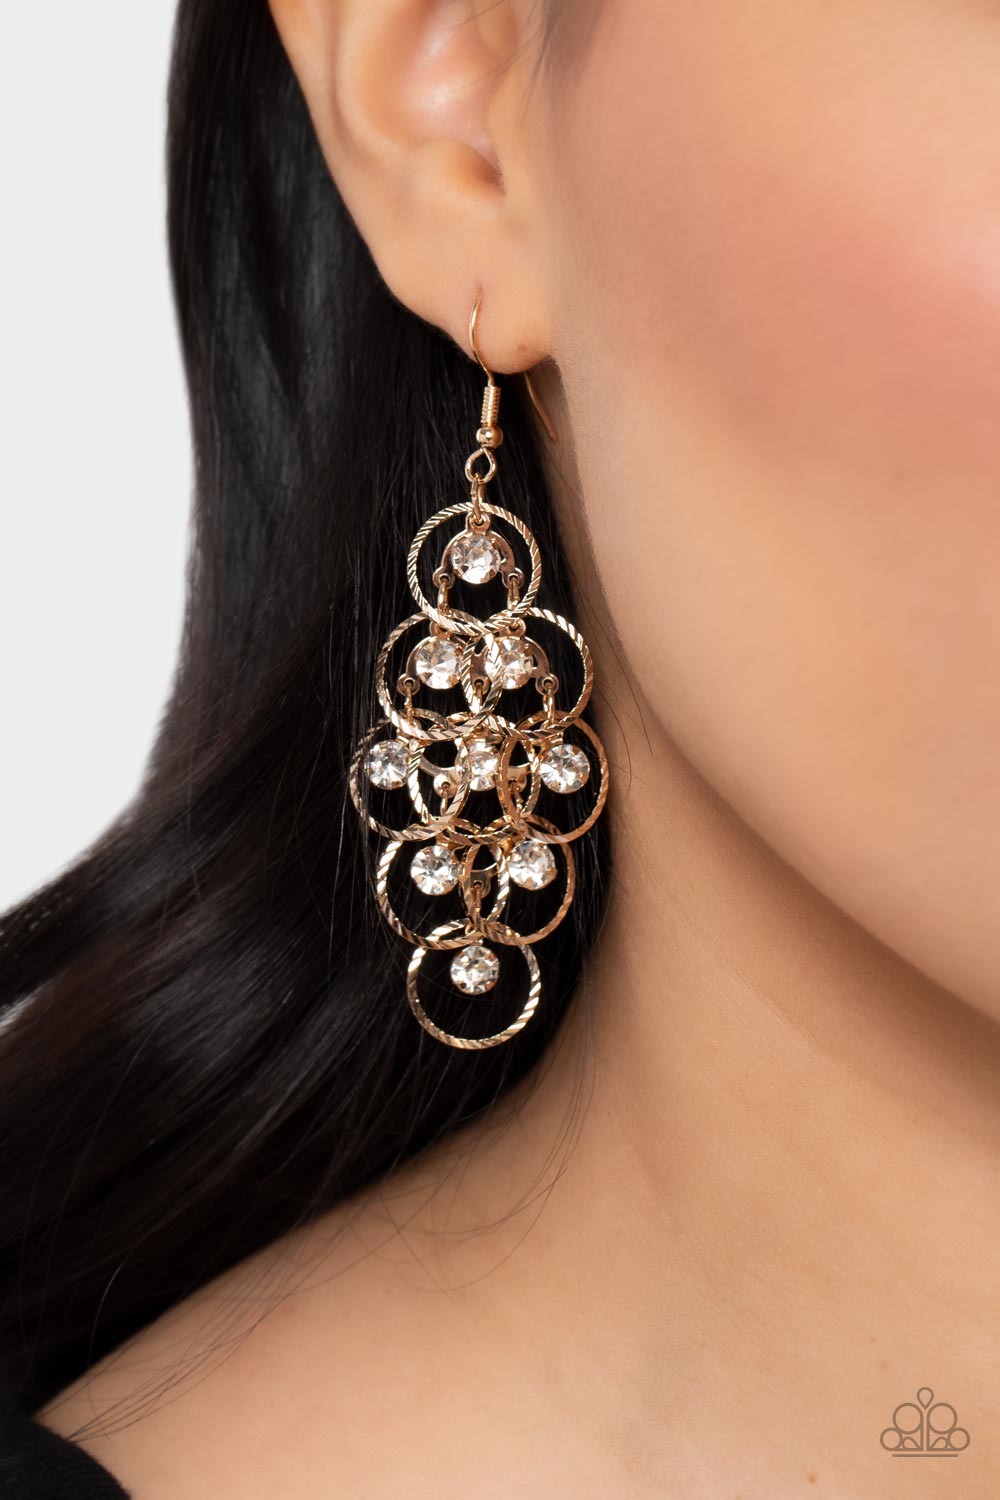 Head Rush Gold and White Rhinestone Earrings - Paparazzi Accessories-on model - CarasShop.com - $5 Jewelry by Cara Jewels